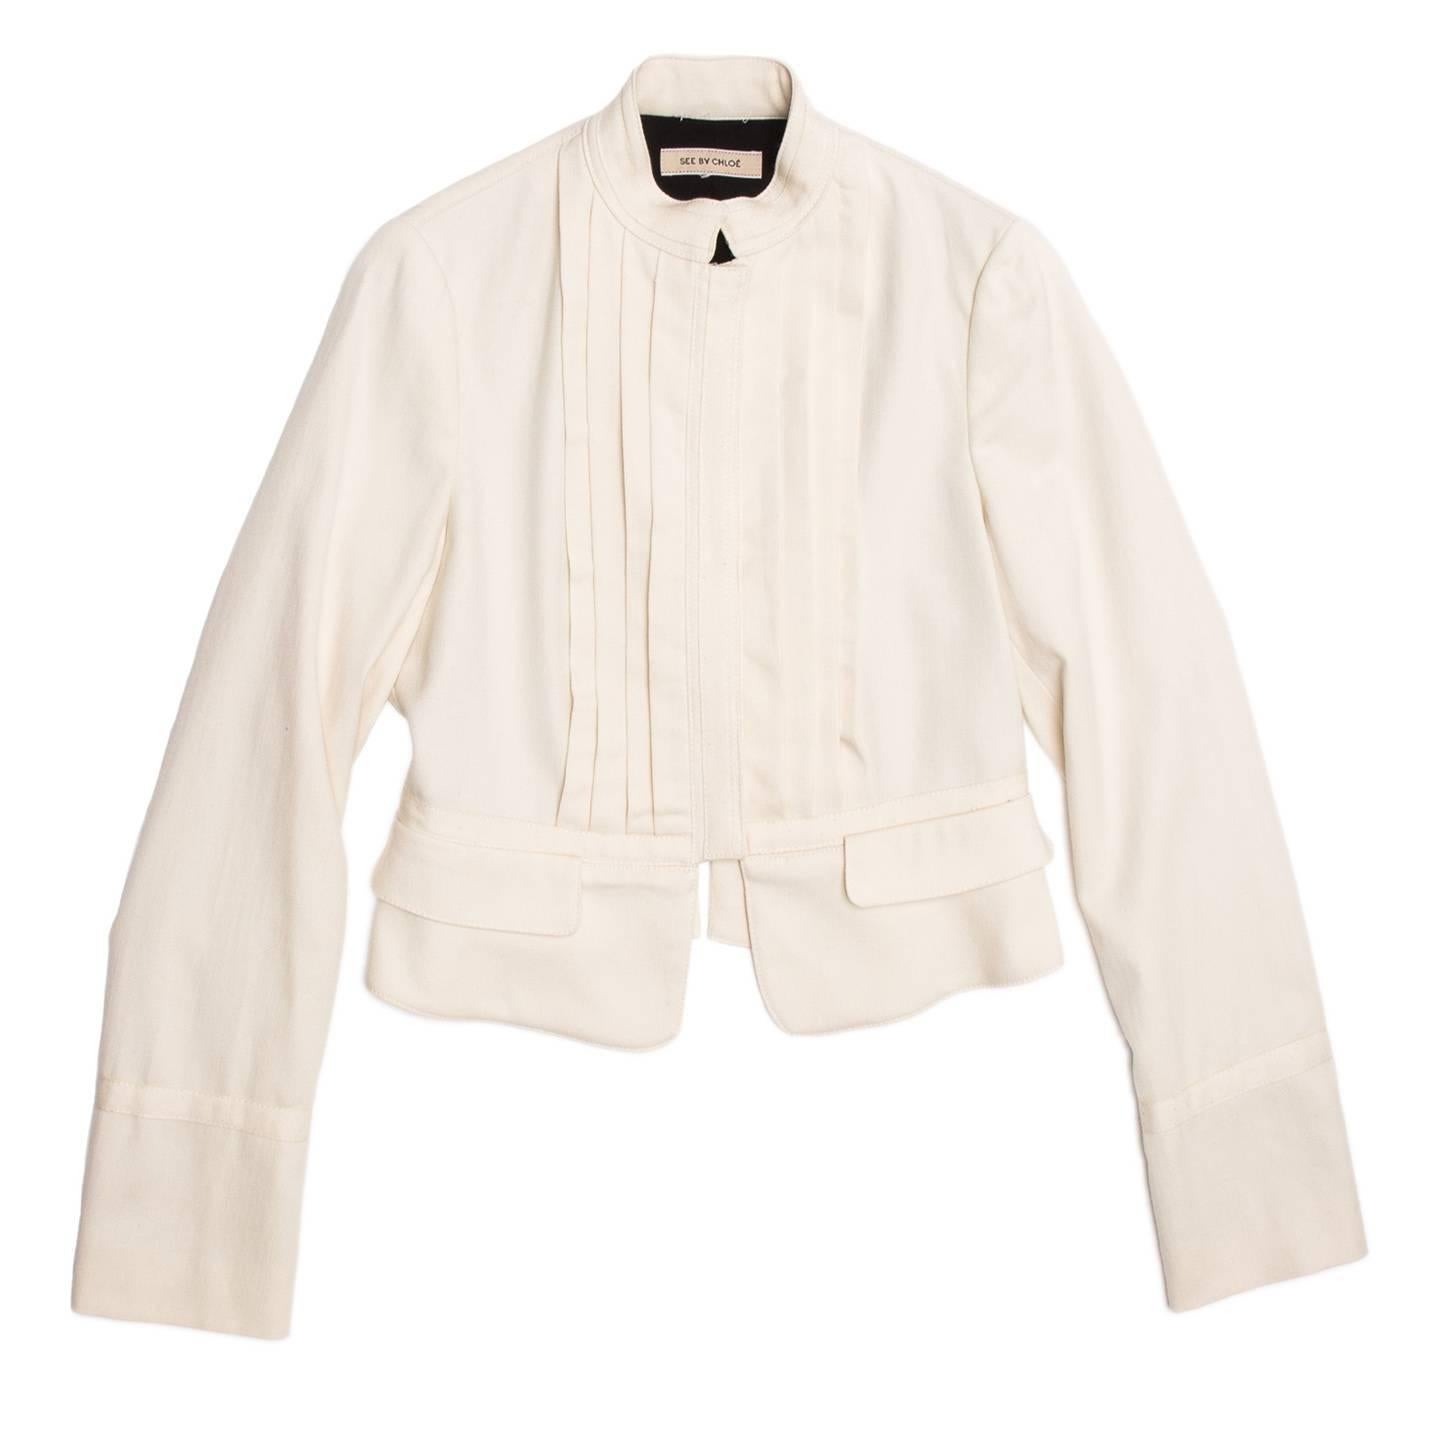 Cream wool/cotton cropped bellboy style jacket with pleated front detail and tone-on-tone binding on neck, cuffs, waist line, front opening and back seams. The jacket fastens at center front with concealed metal snap buttons.

Size  46 Italian